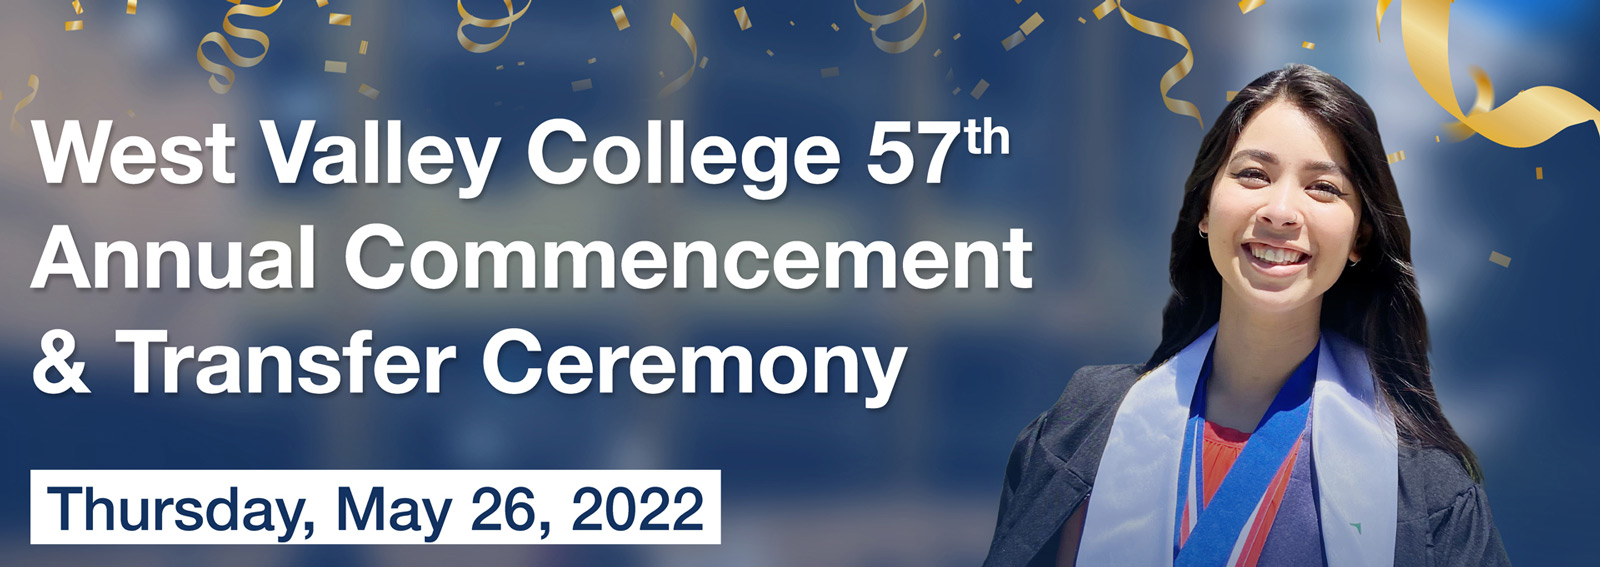 Smiling graduate with 2022 ceremony details